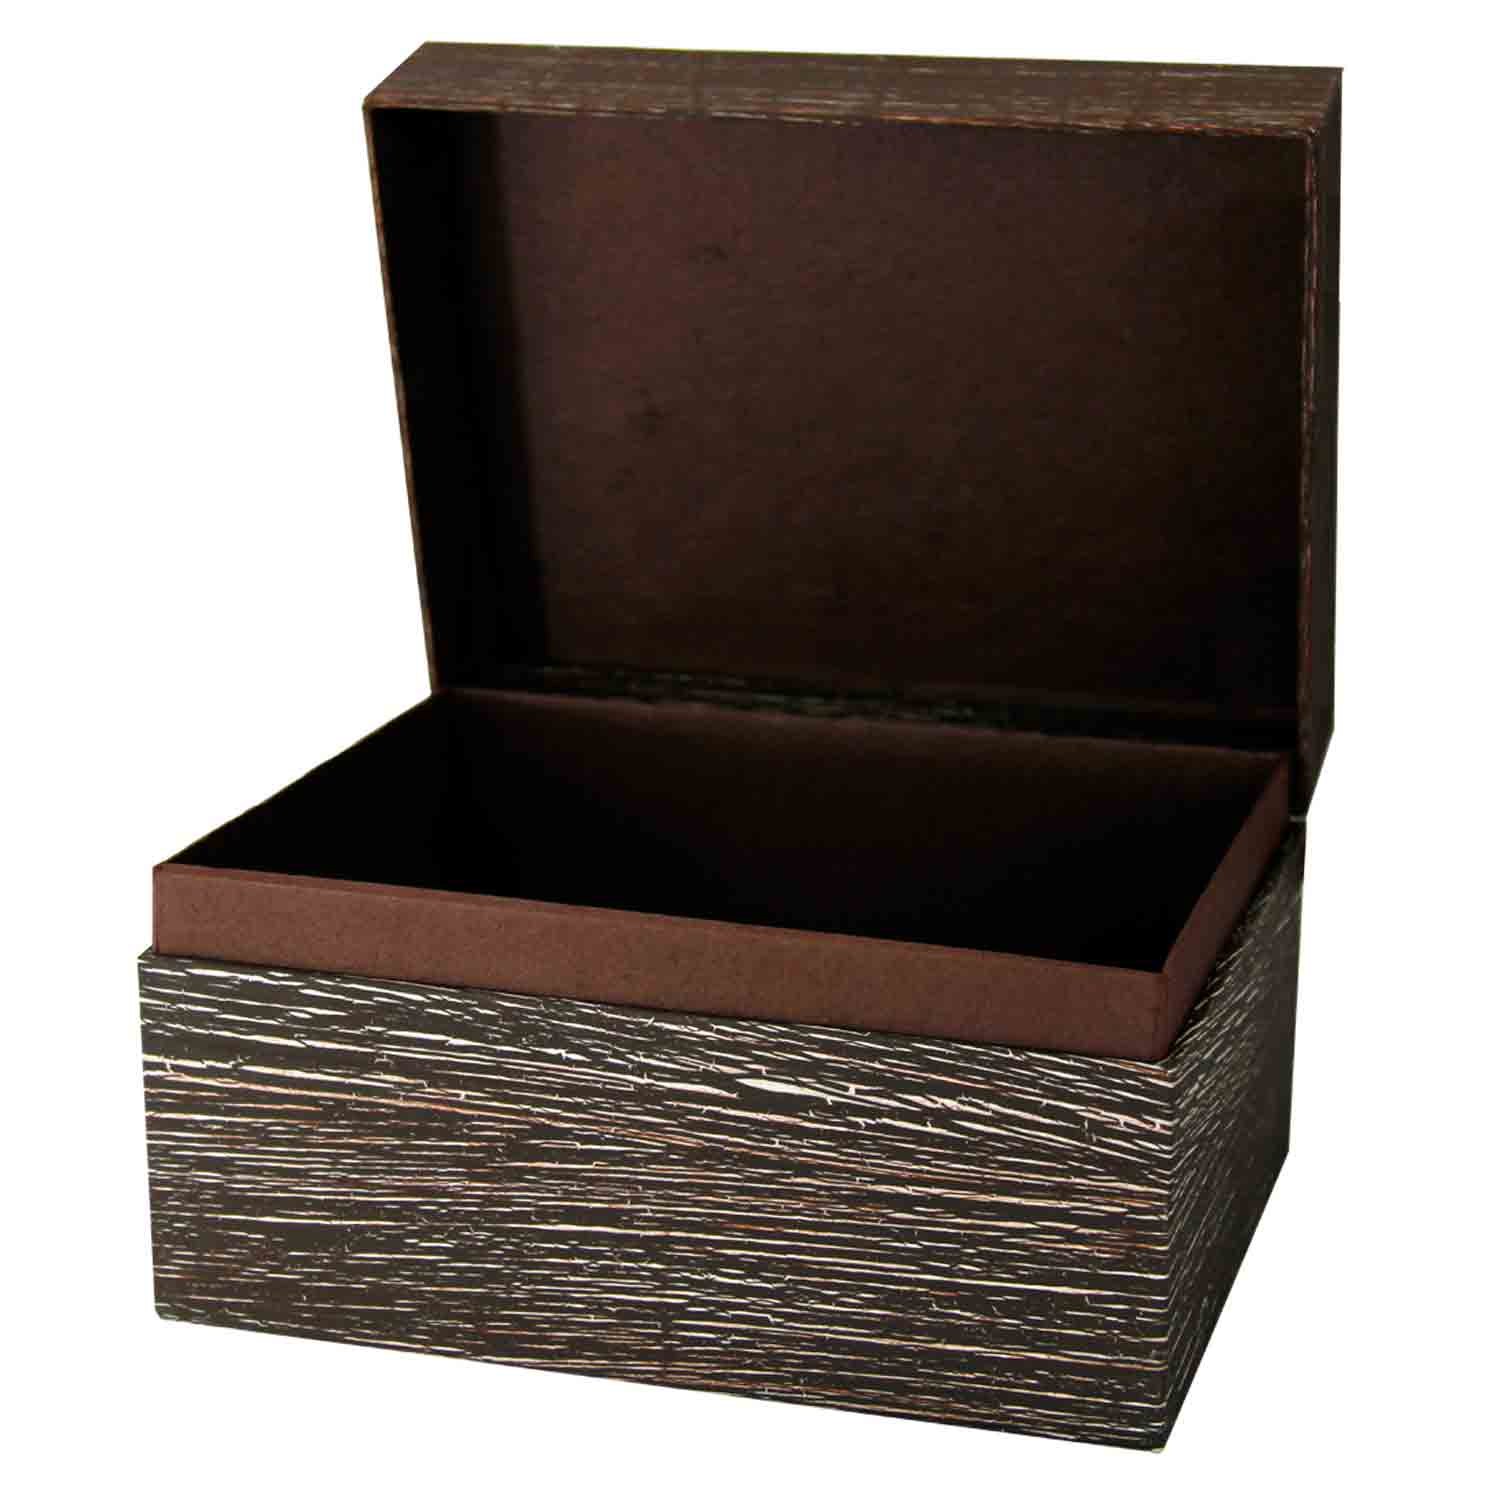 EarthUrn Chest Biodegradable Urn for Ashes in Embossed Brown - Adult